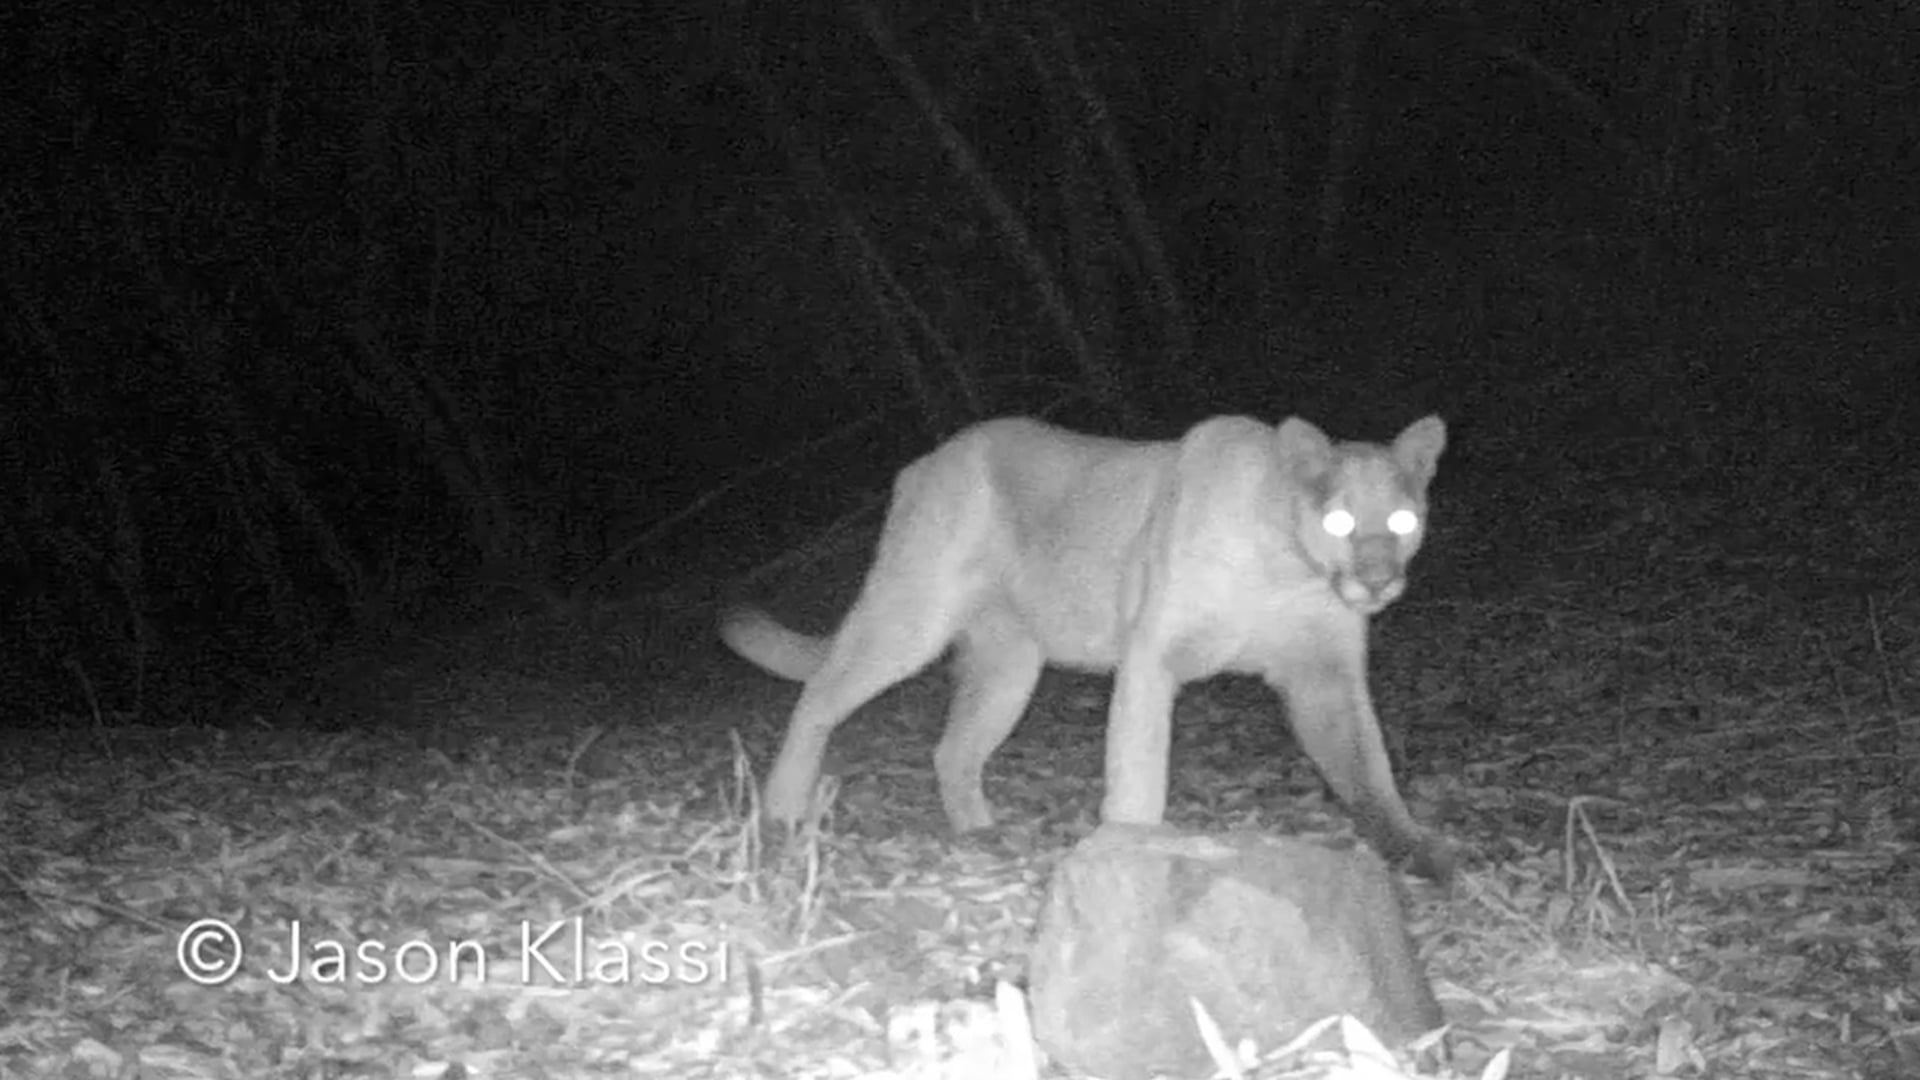 Chippewa the Puma passes by my infrared trail camera first in the twilight and then 2 days later in the dark of night. © Jason Klassi